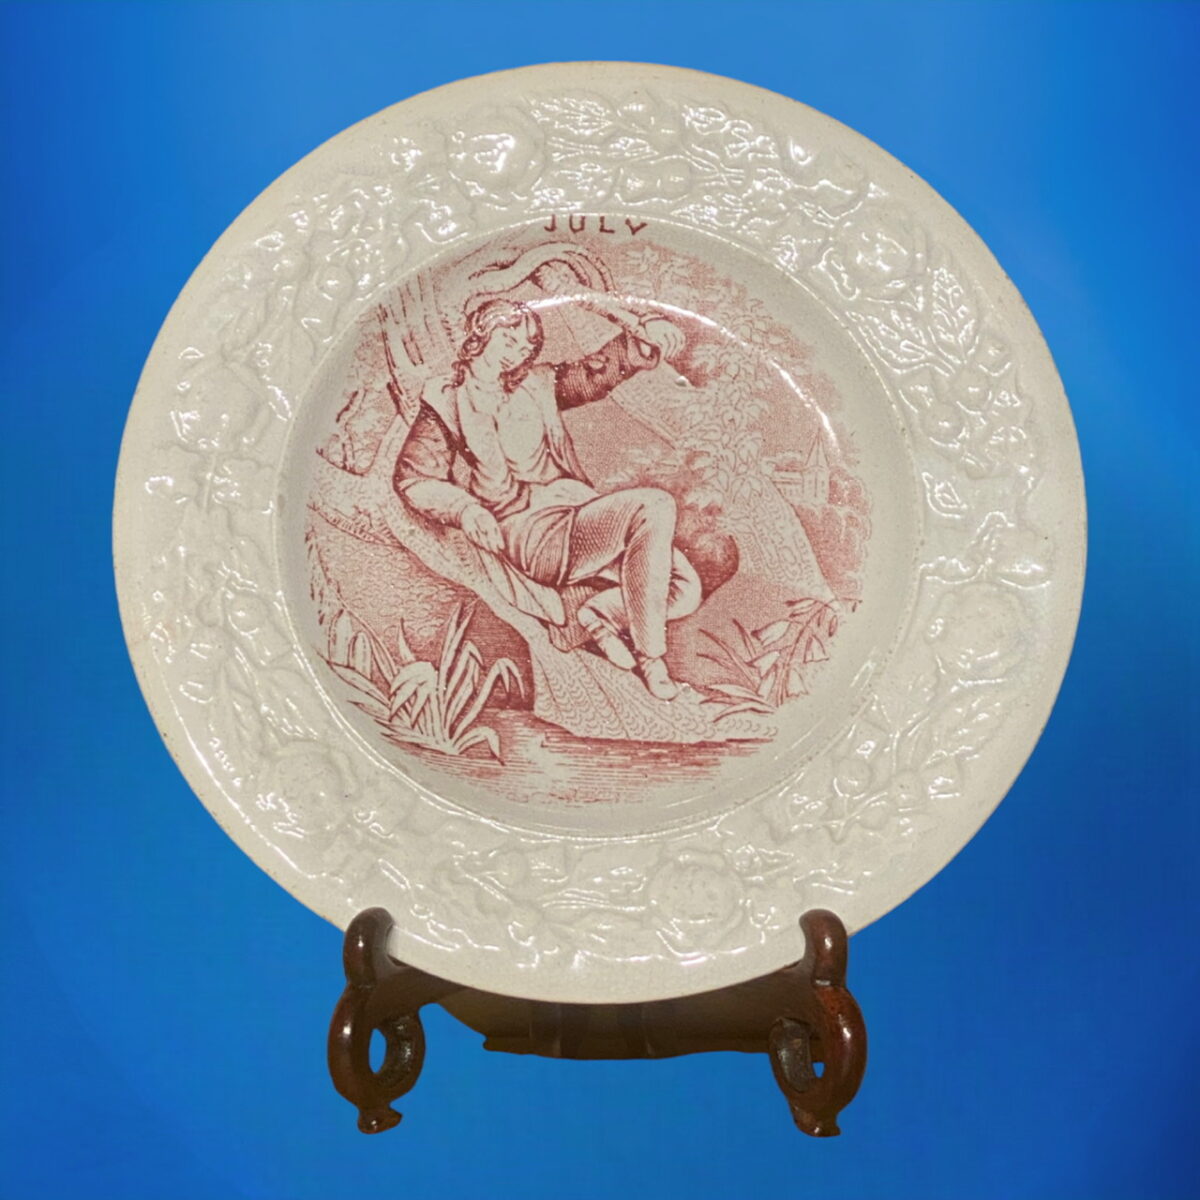 Early Victorian Staffordshire Nursery Plate – ‘JULY’